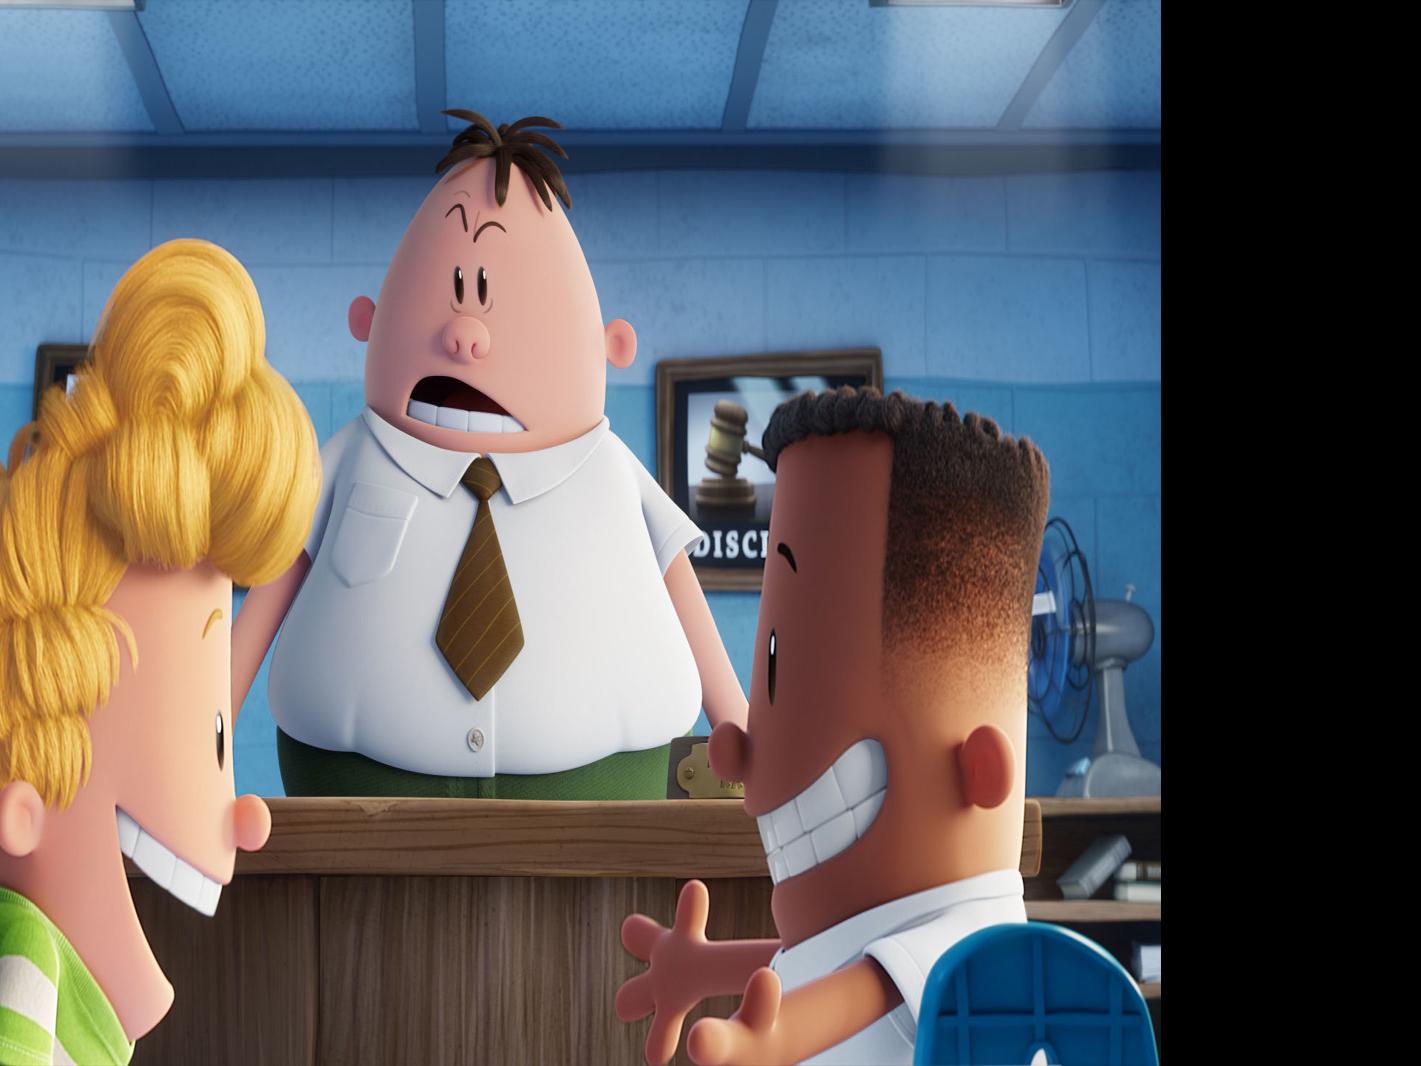 Movie review: Humor in 'Captain Underpants' very elementary